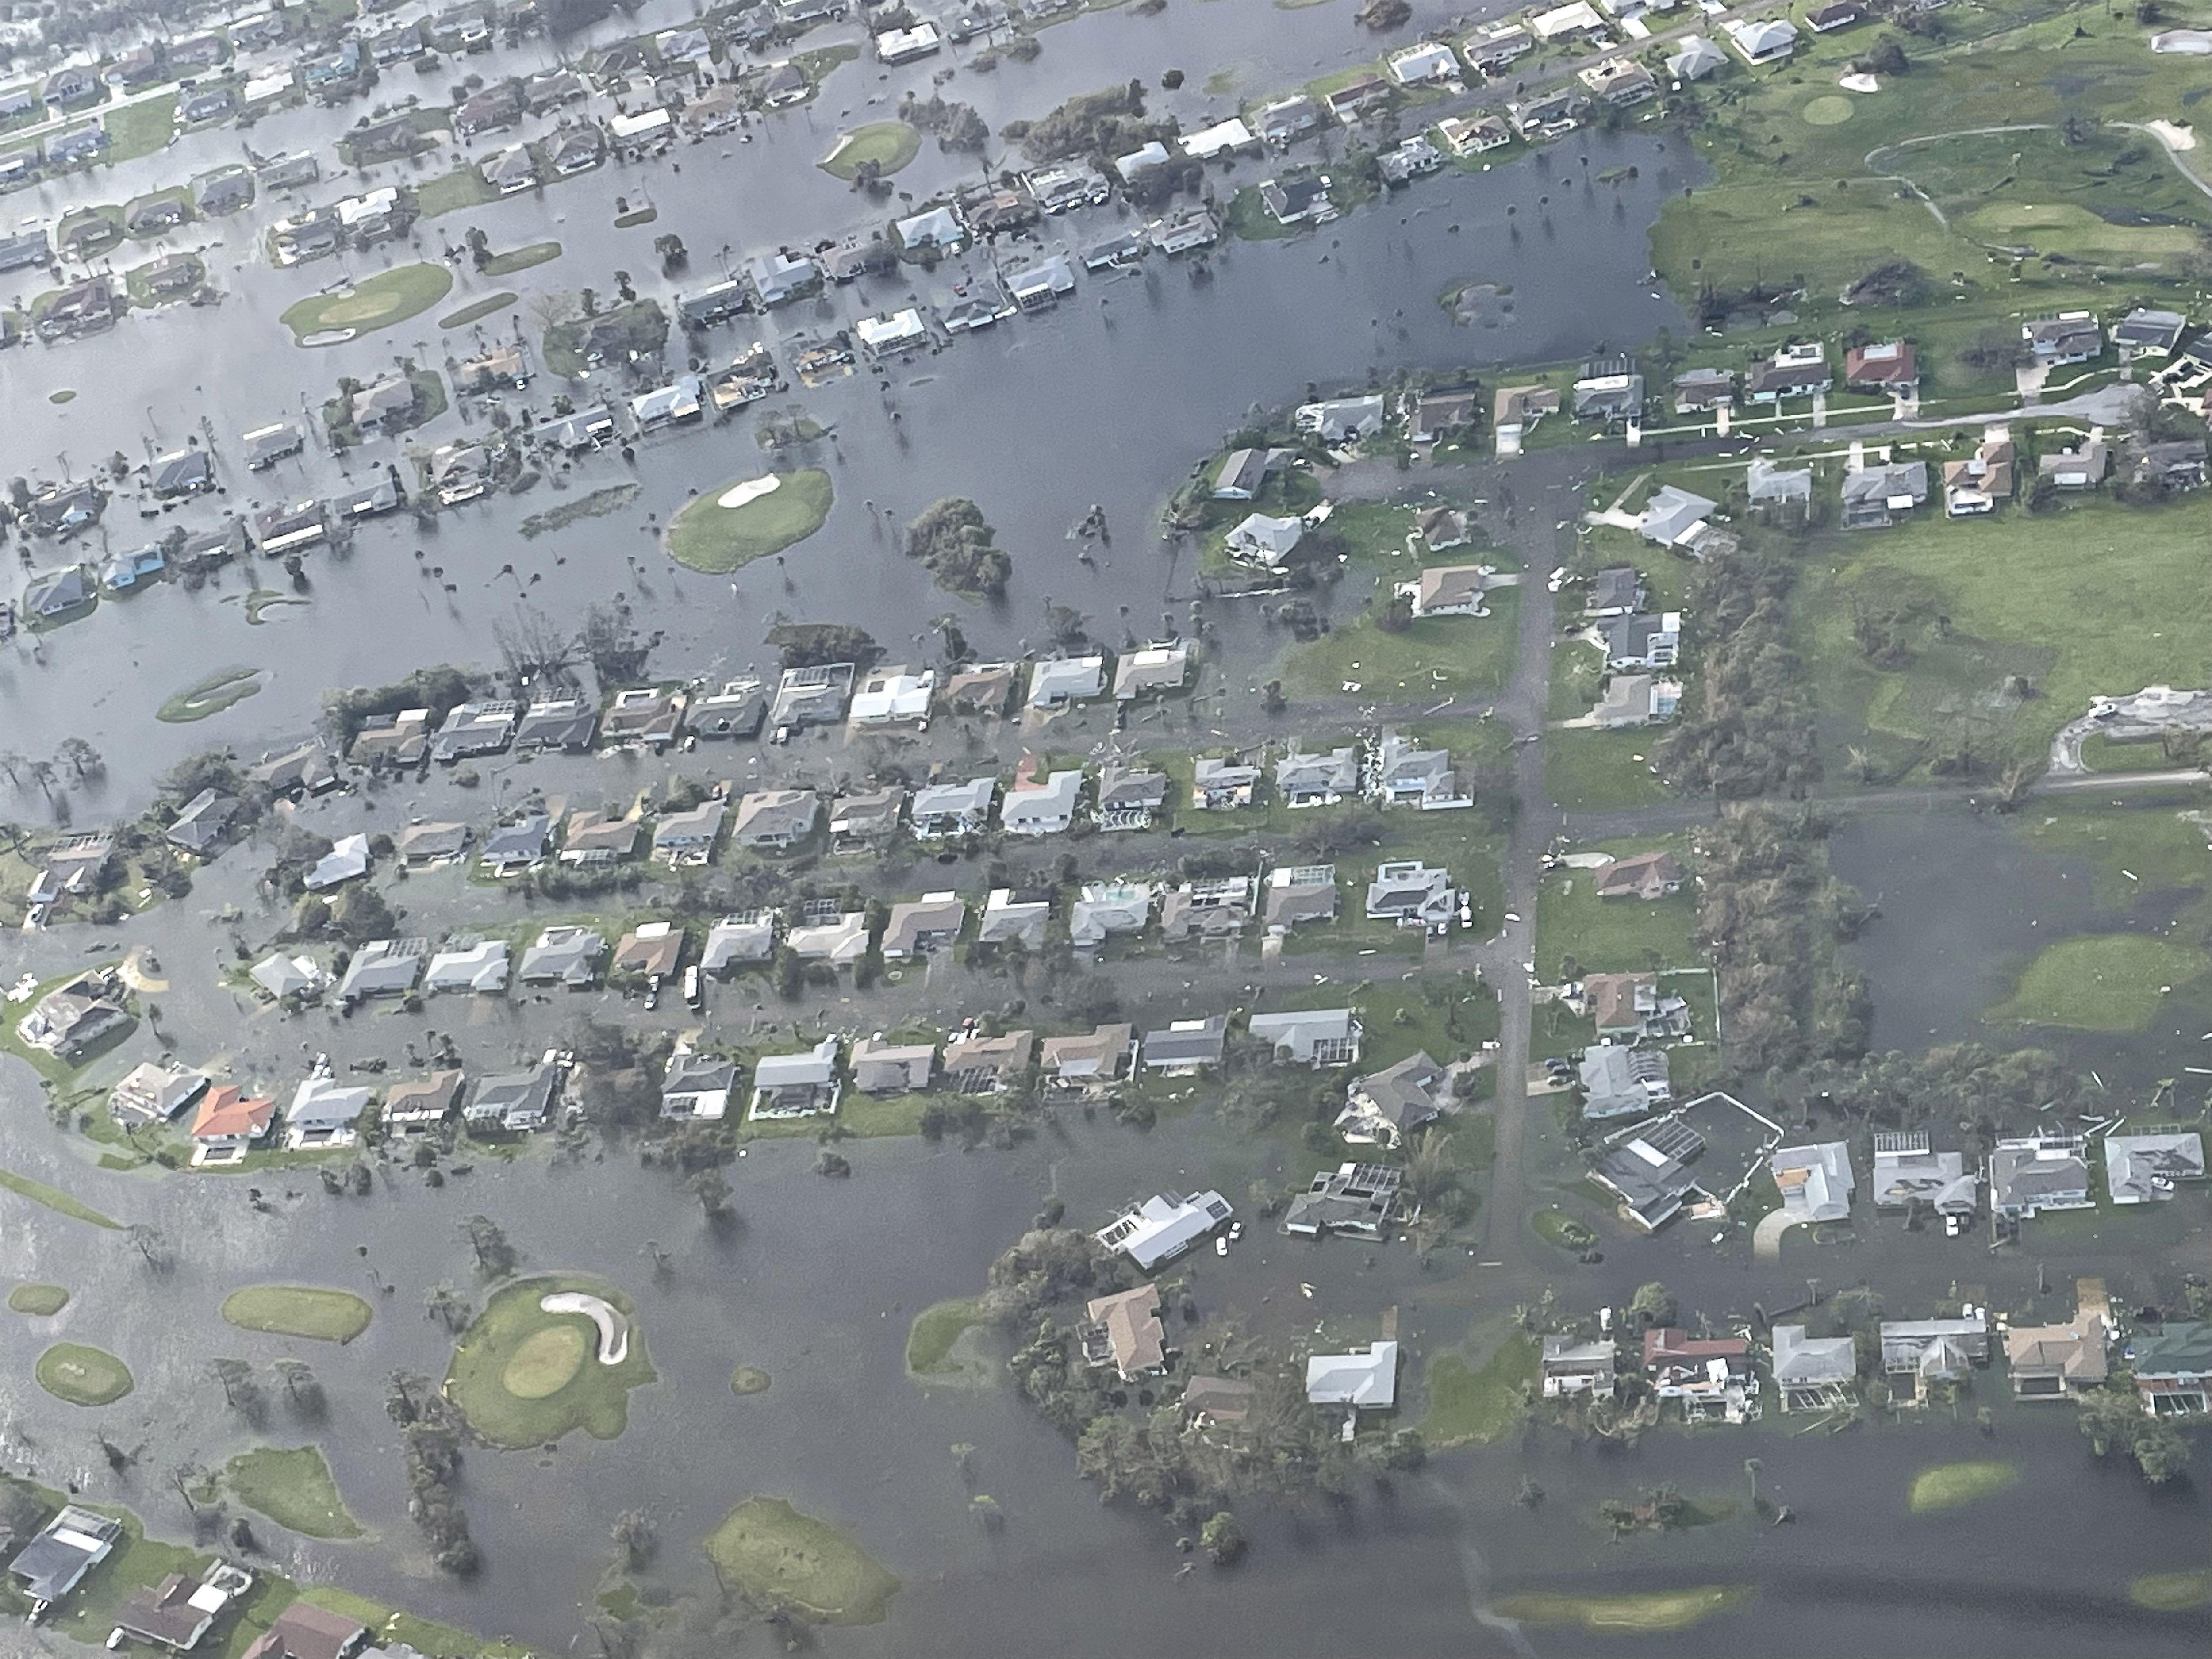 Aerials of the damage wrought by Hurricane Ian on Lee County, Florida